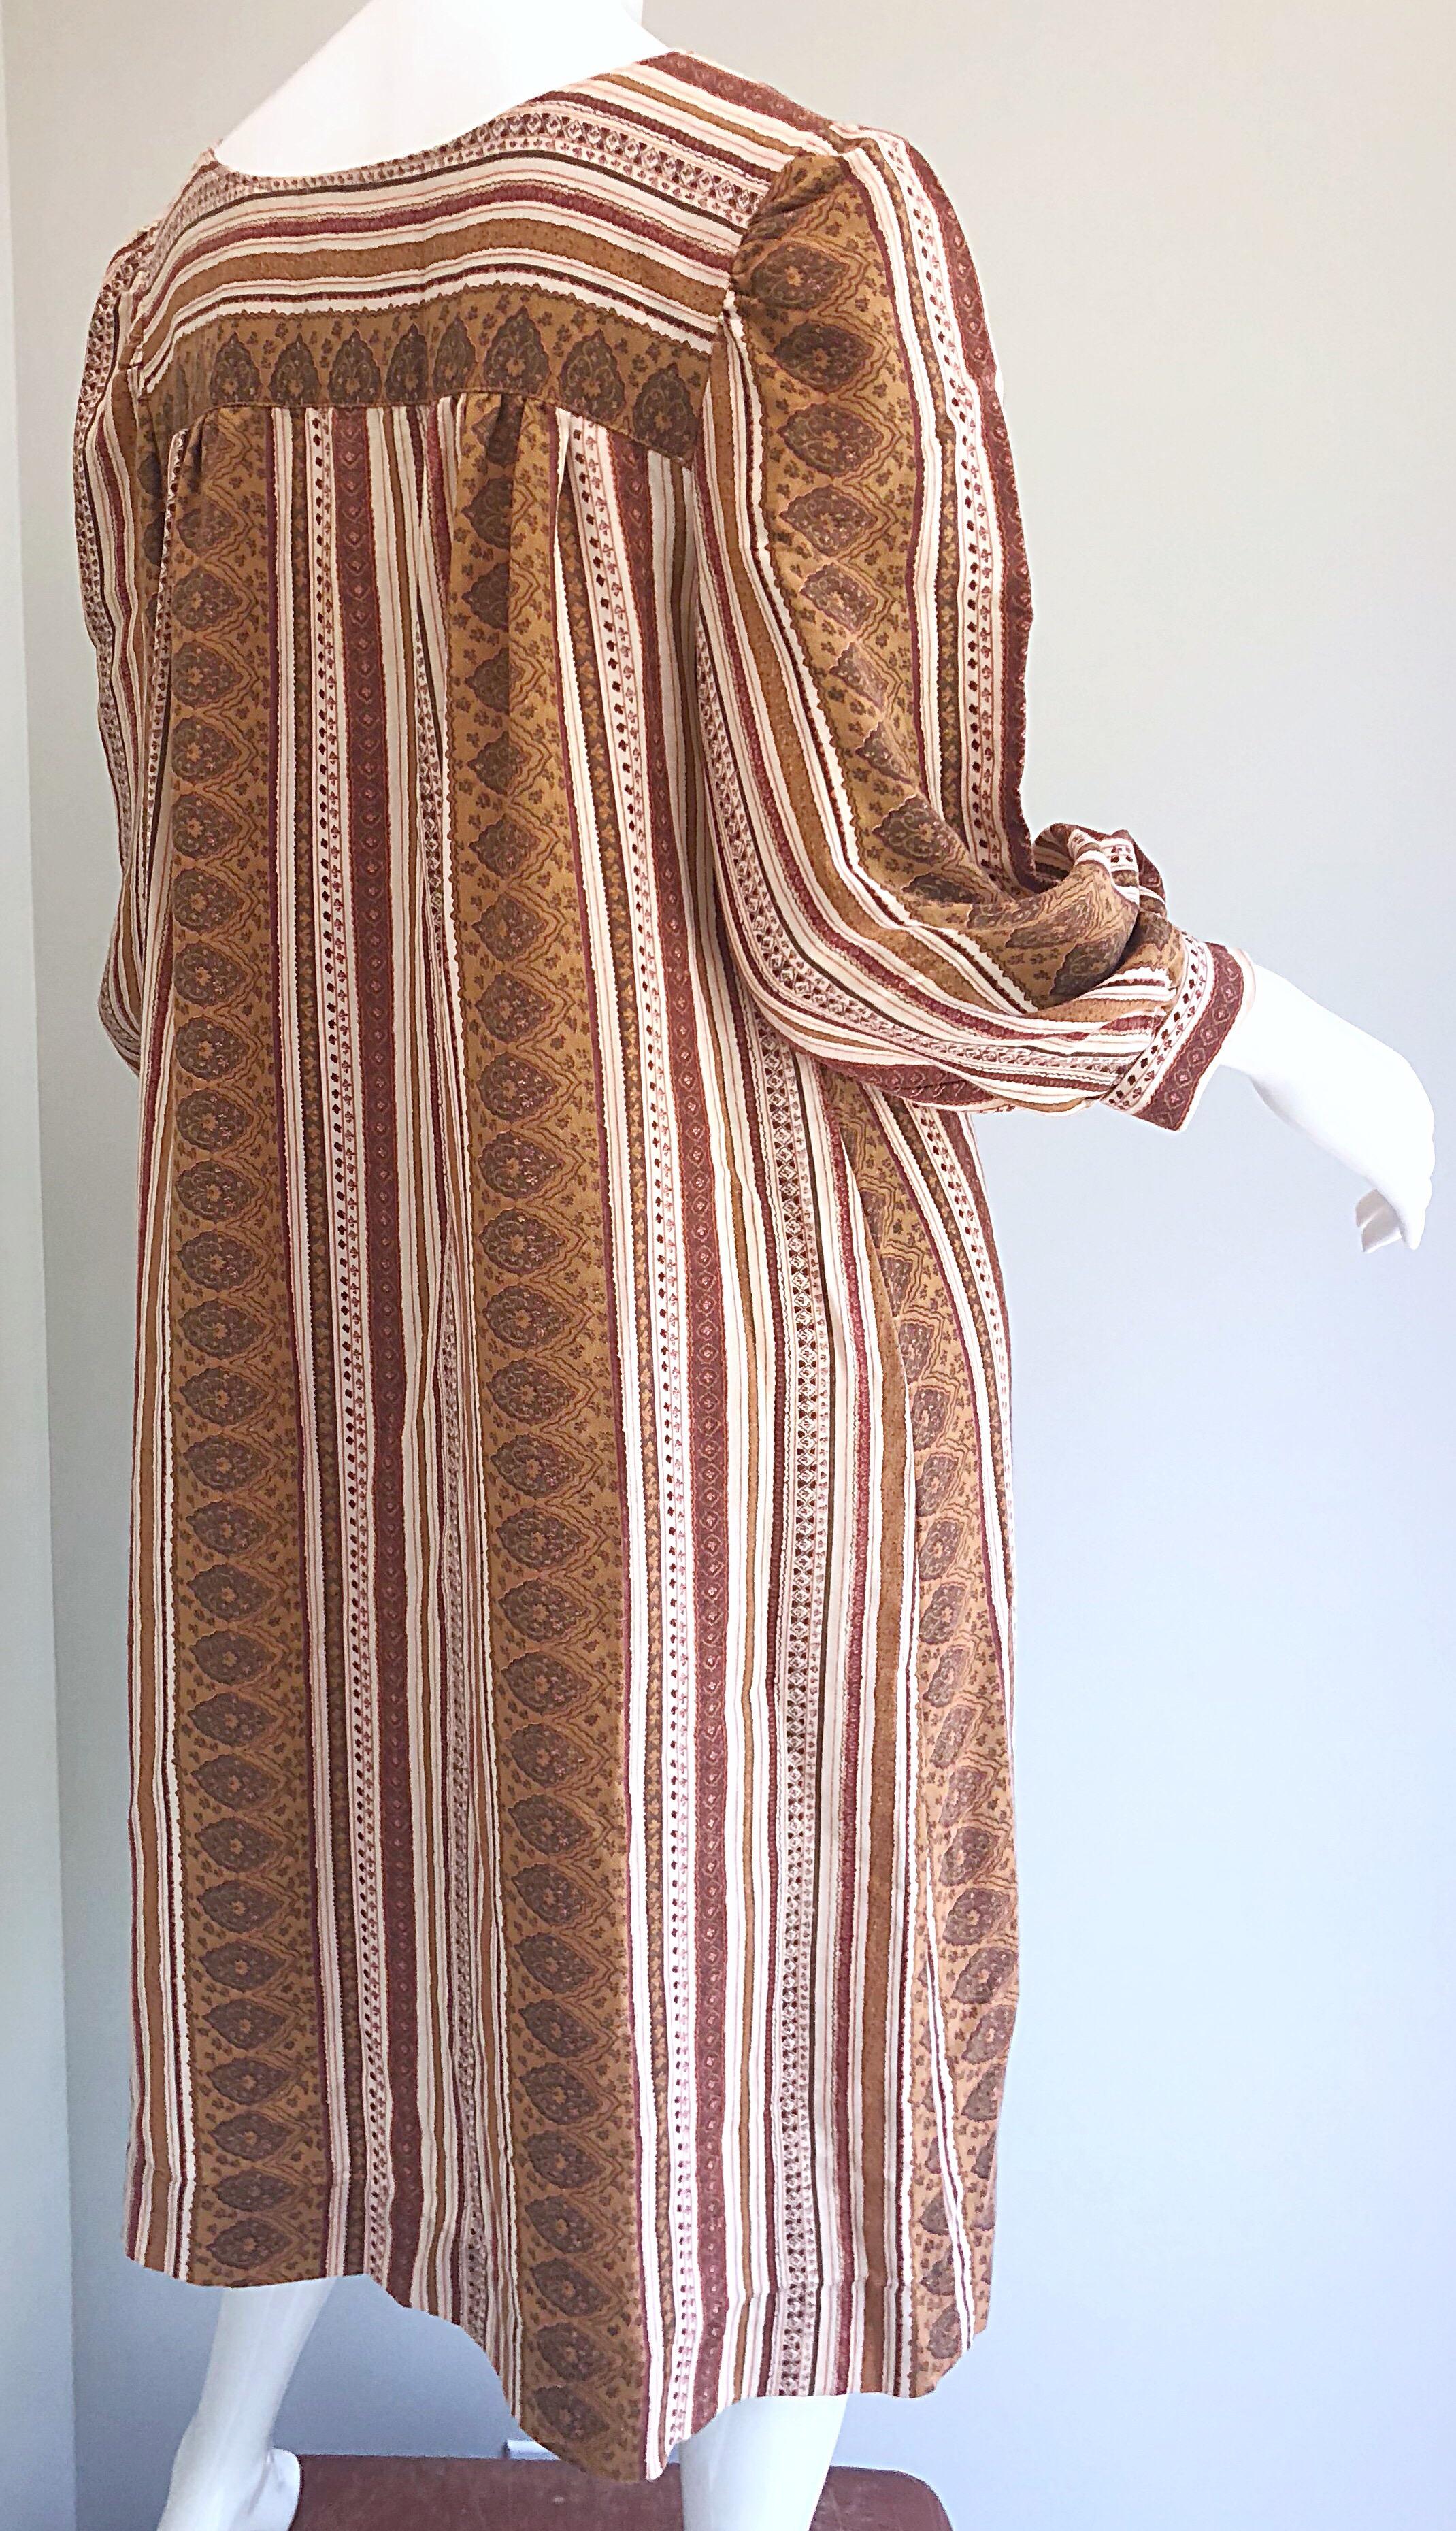 1970s Boho Chic Brown and Ivory Soft Cotton Paisley Print Vintage 70s Dress 10